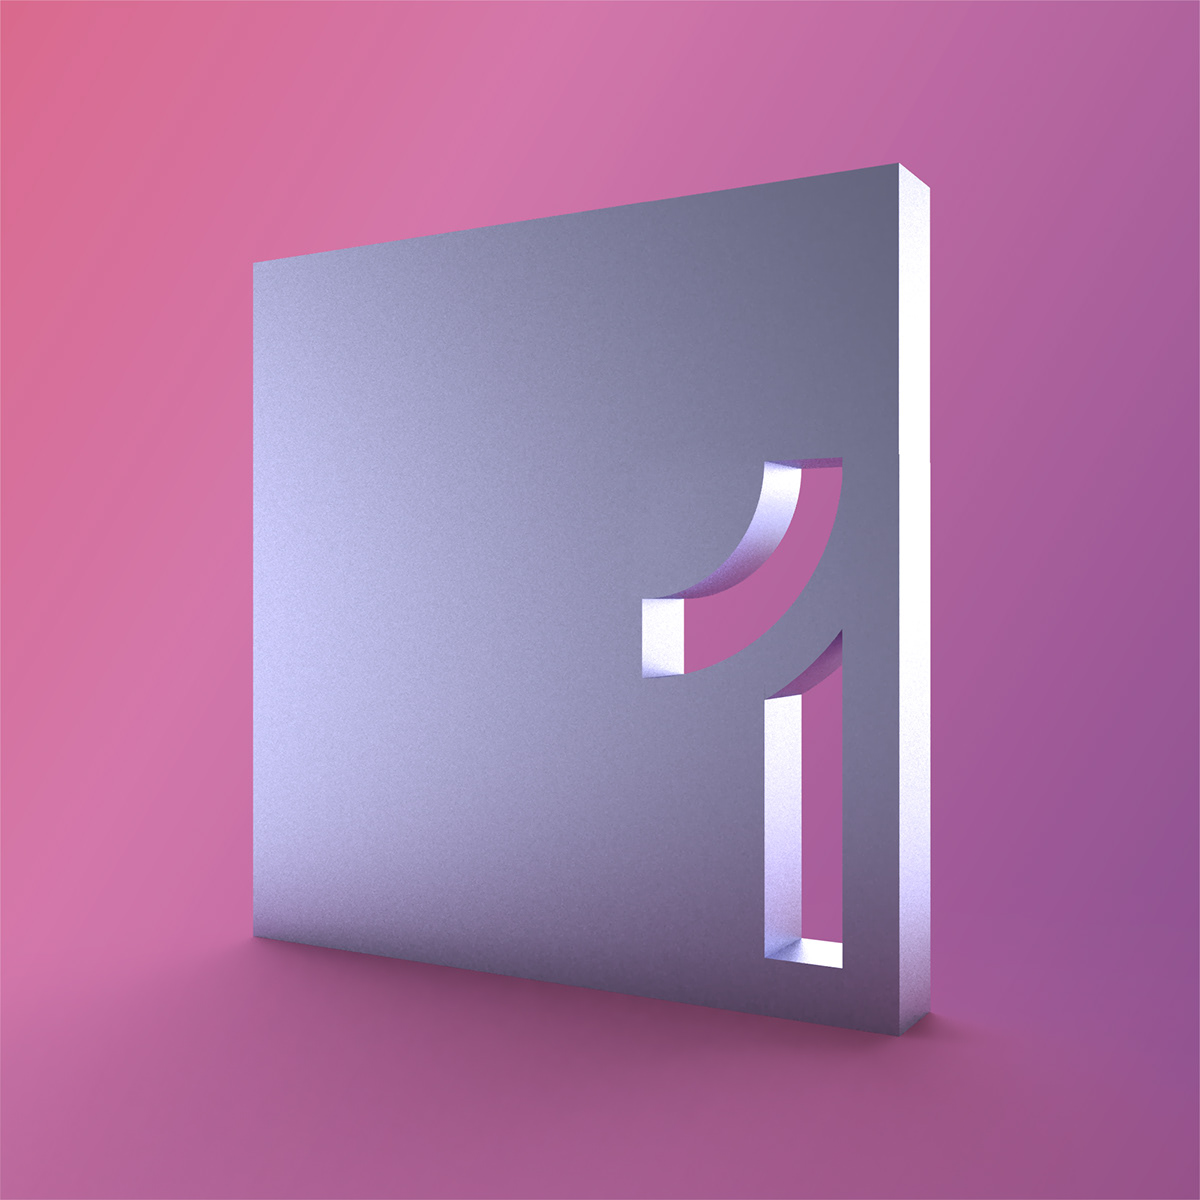 36days_adobe contest 36daysoftype typography   3D 36daysoftype06 madeWithCC adobedesign letters adobeawards